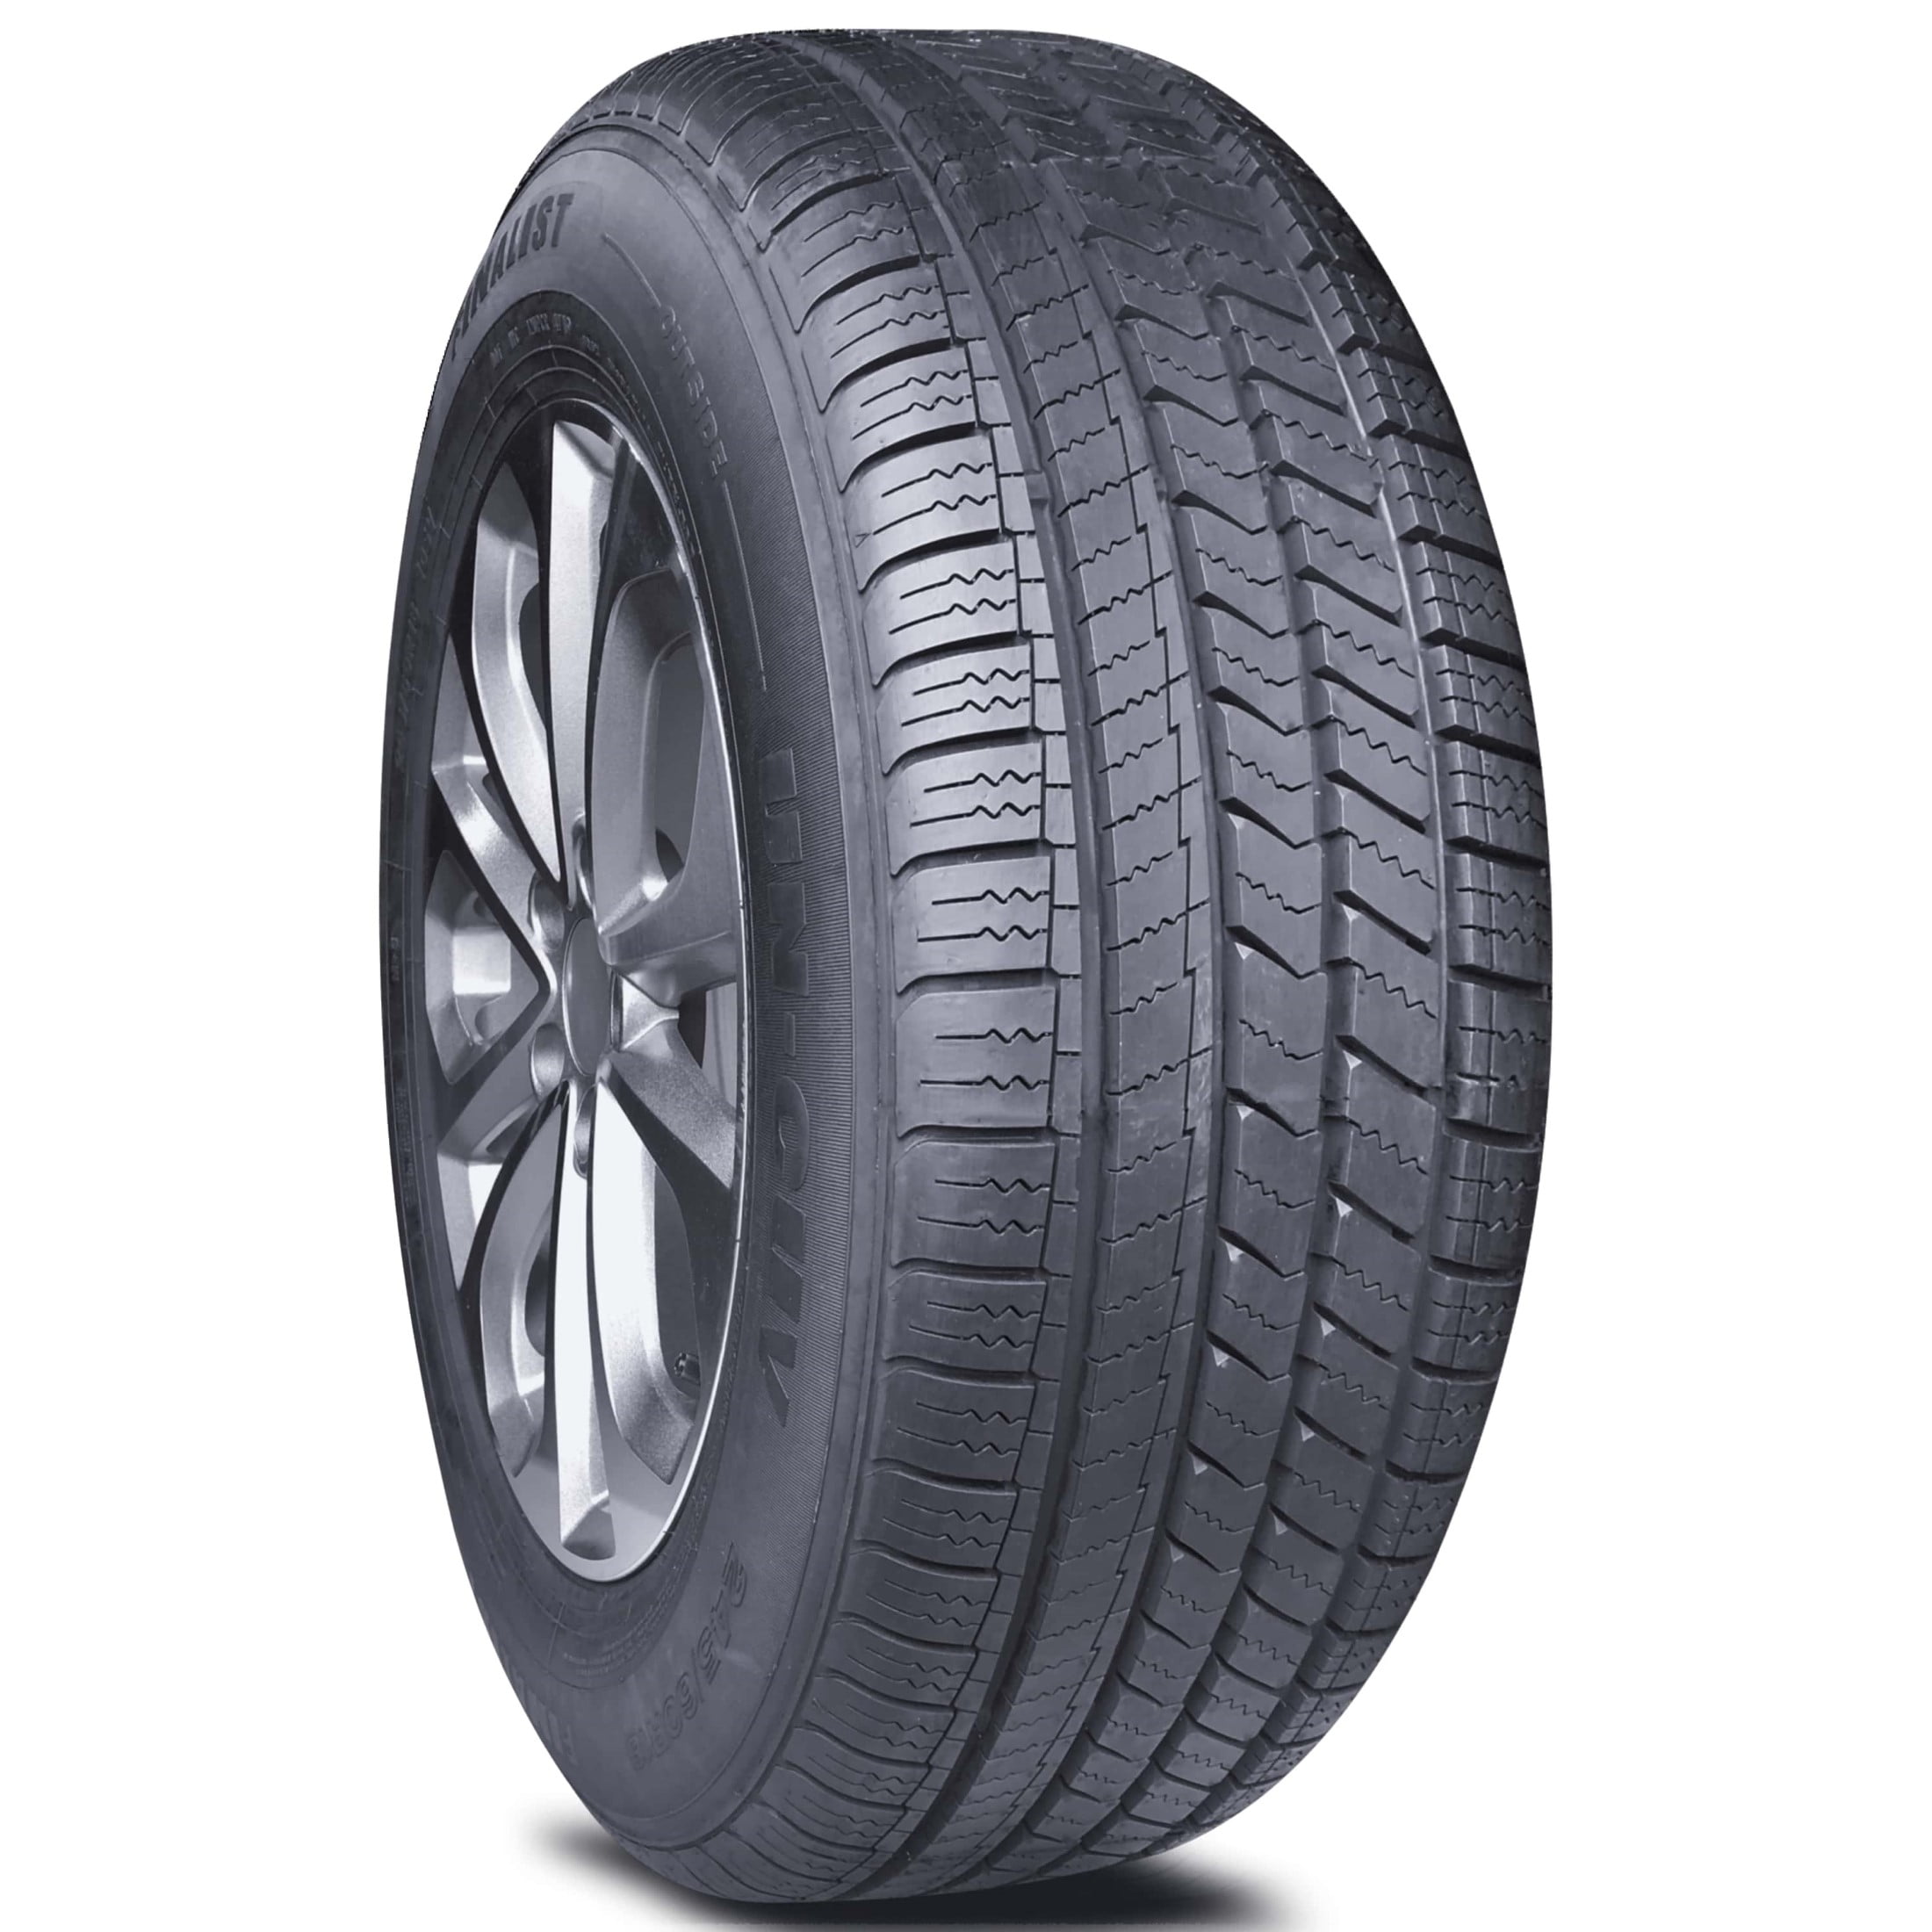 SUV CUV XL Extra Season Only) High All 235/65/17 108V Finalist 235/65R17 Performance Tire (Tire Load UN-CUV A/S